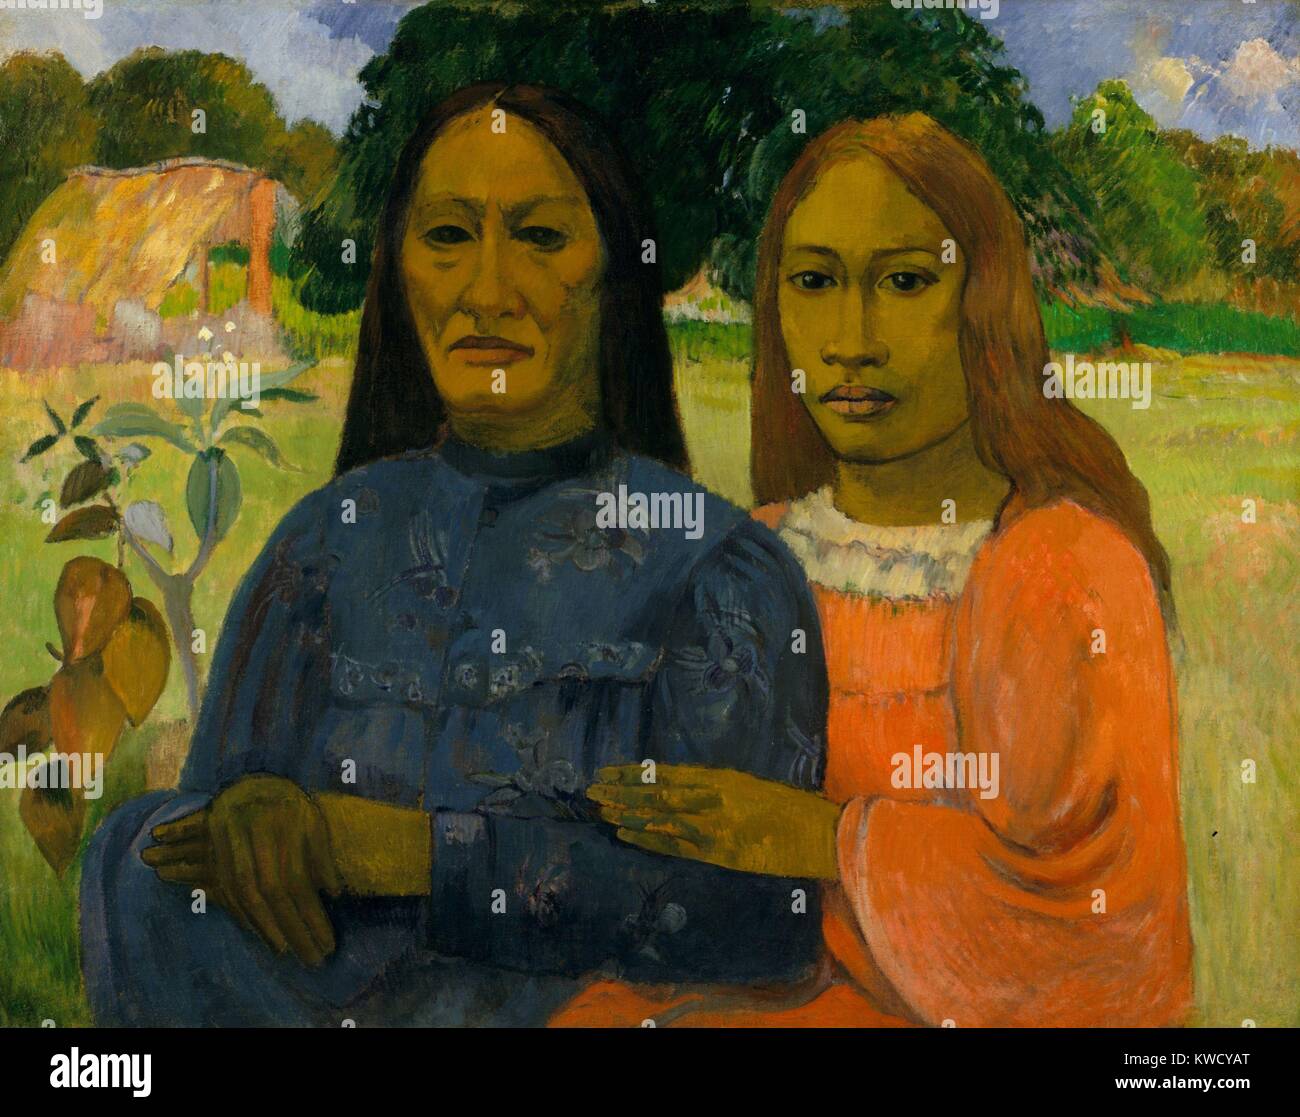 Two Women, by Paul Gauguin, 1901- 02, French Post-Impressionist painting, oil on canvas. Gauguin painted the two Tahitian women from a photograph (BSLOC 2017 5 35) Stock Photo